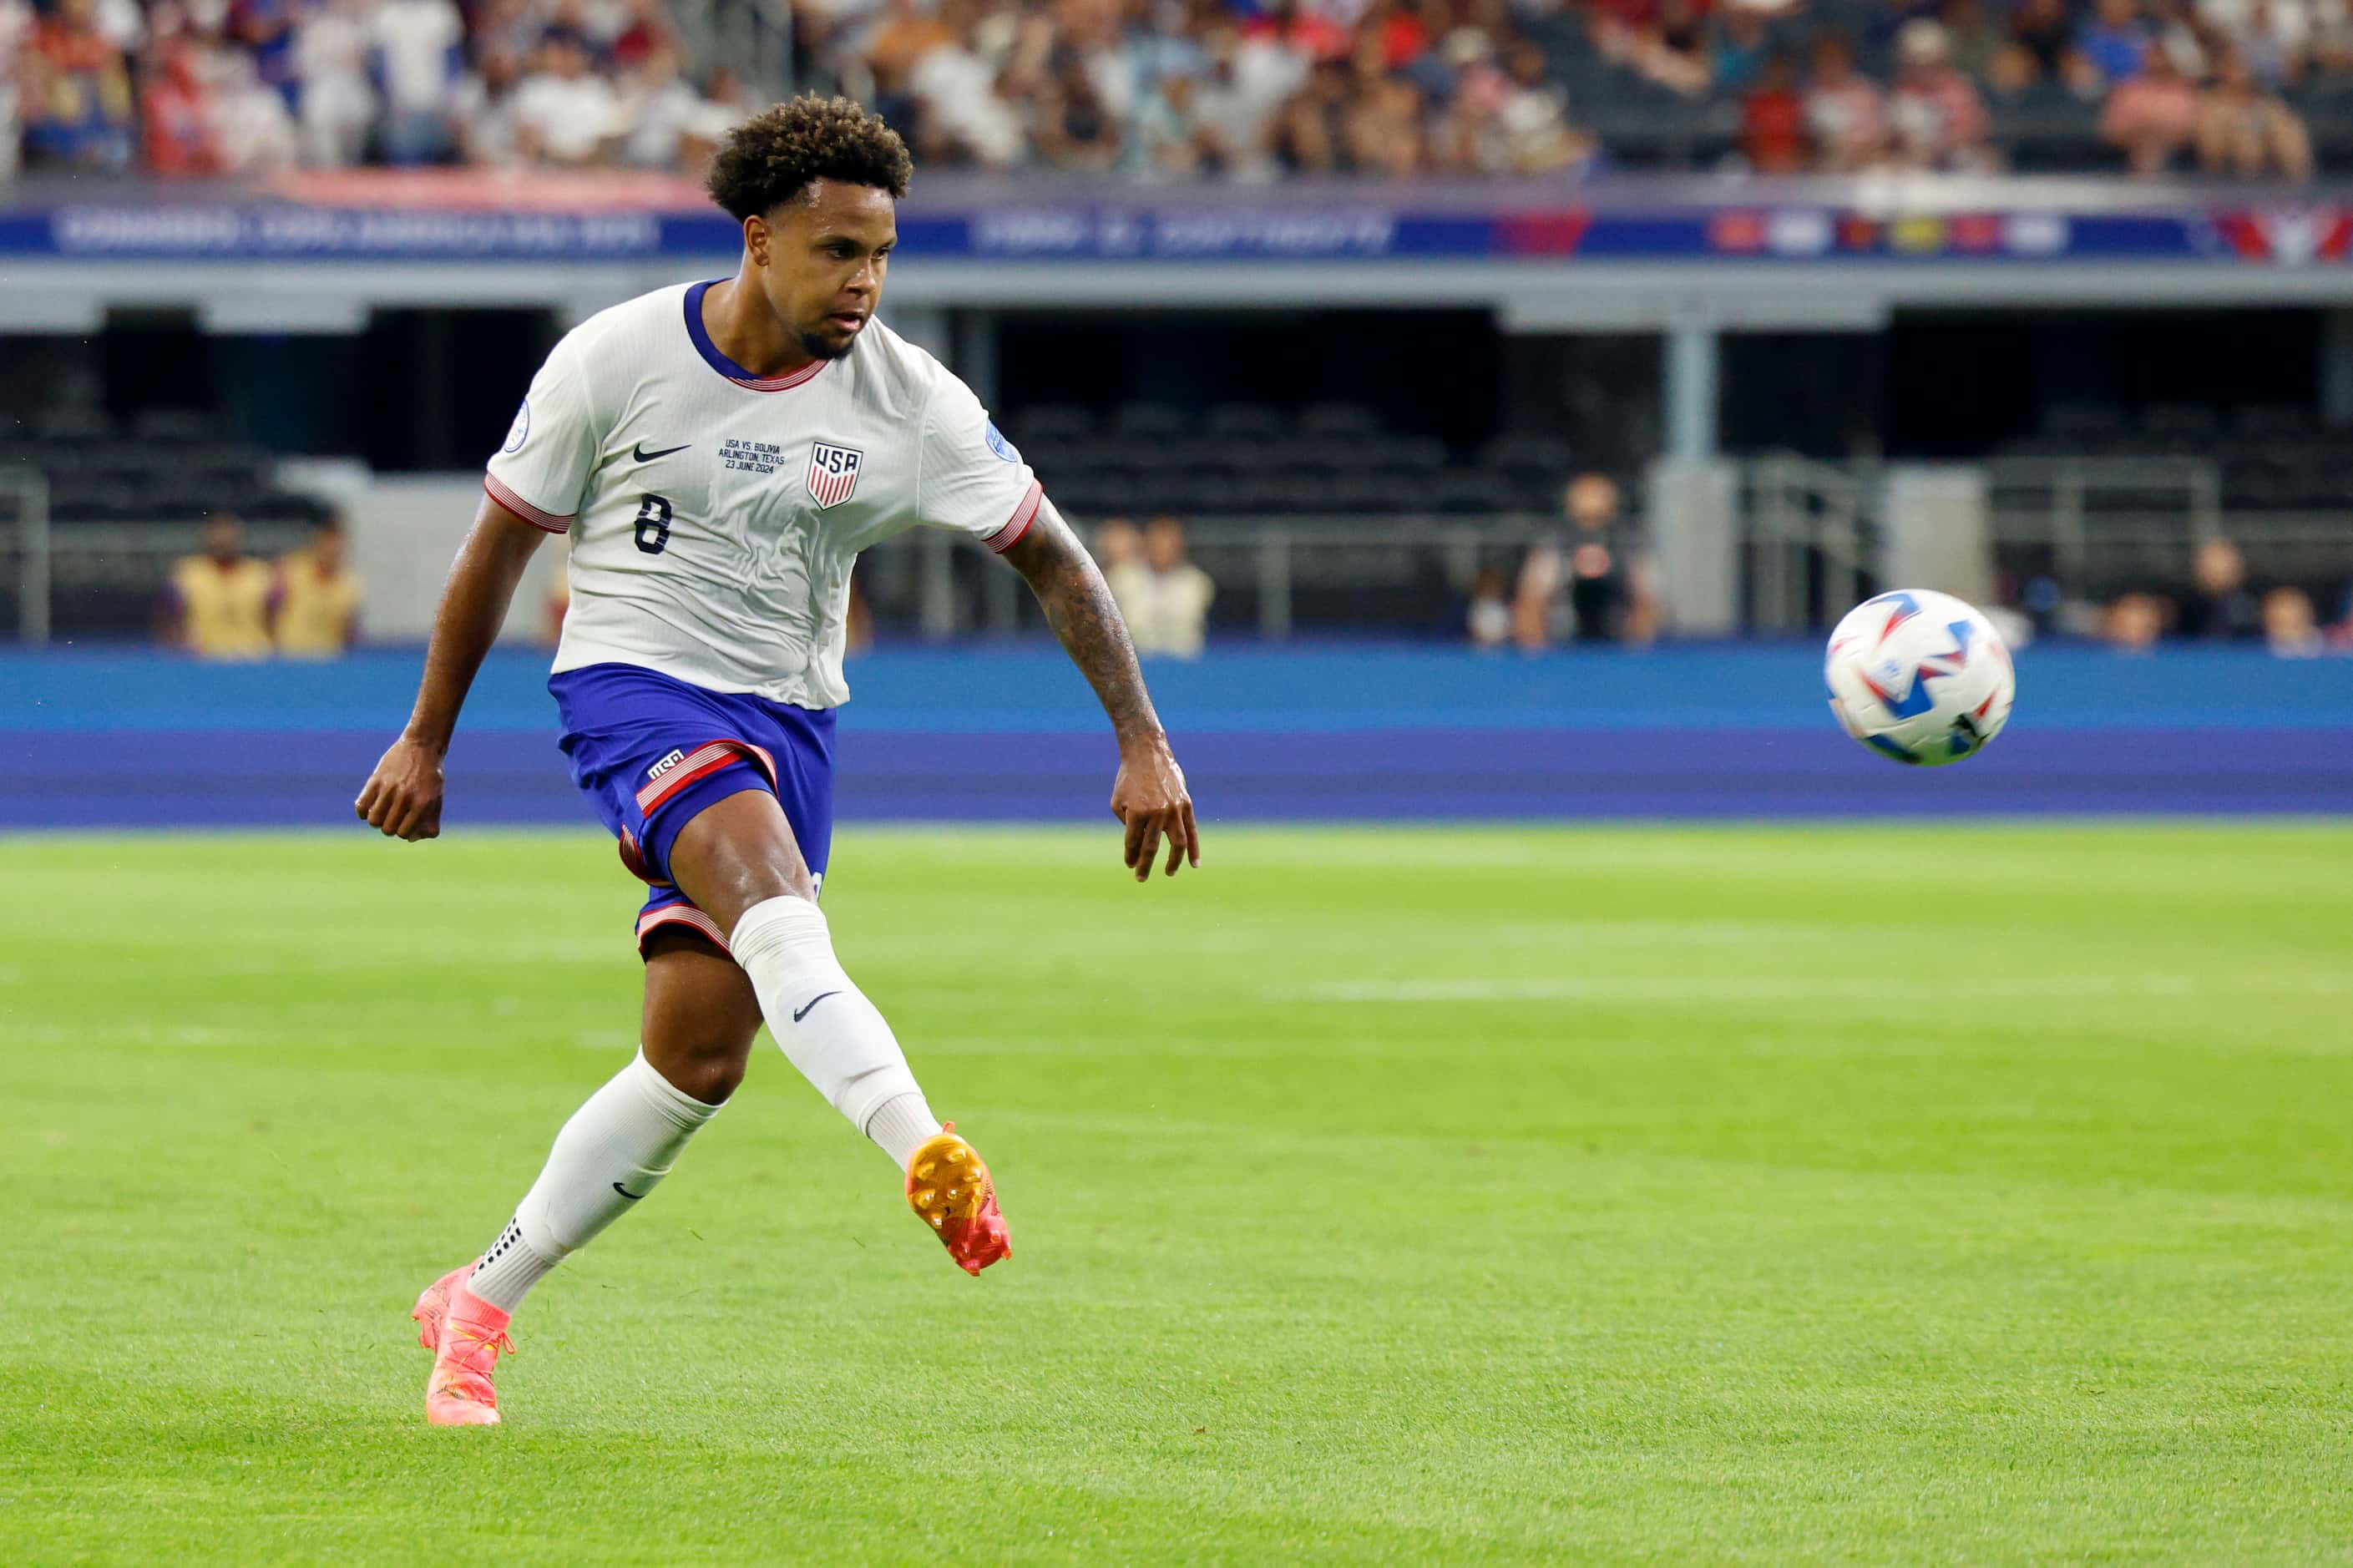 United States midfielder Weston McKennie (8) crosses the ball towards goal during the first...